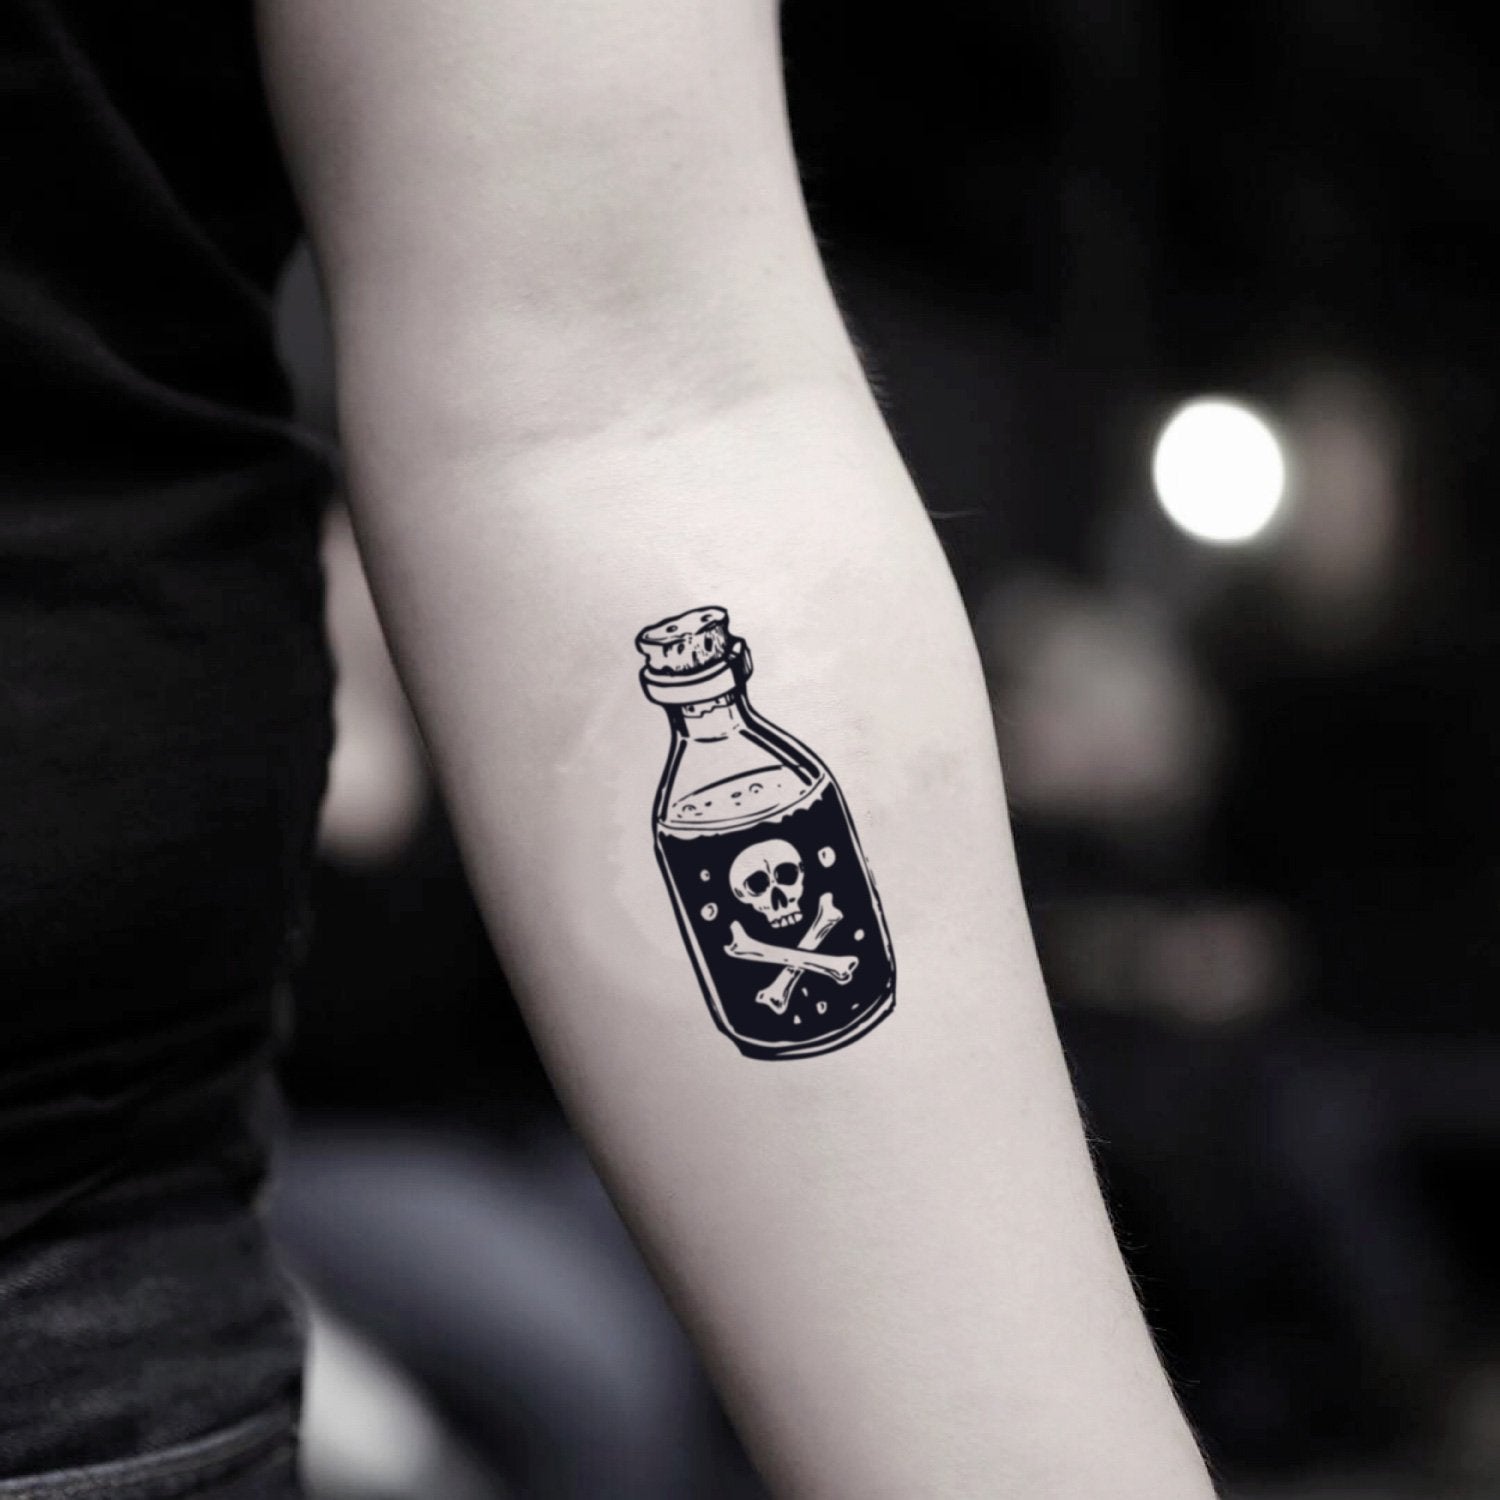 fake small poison bottle potion drink me clubbing club party vintage temporary tattoo sticker design idea on inner arm